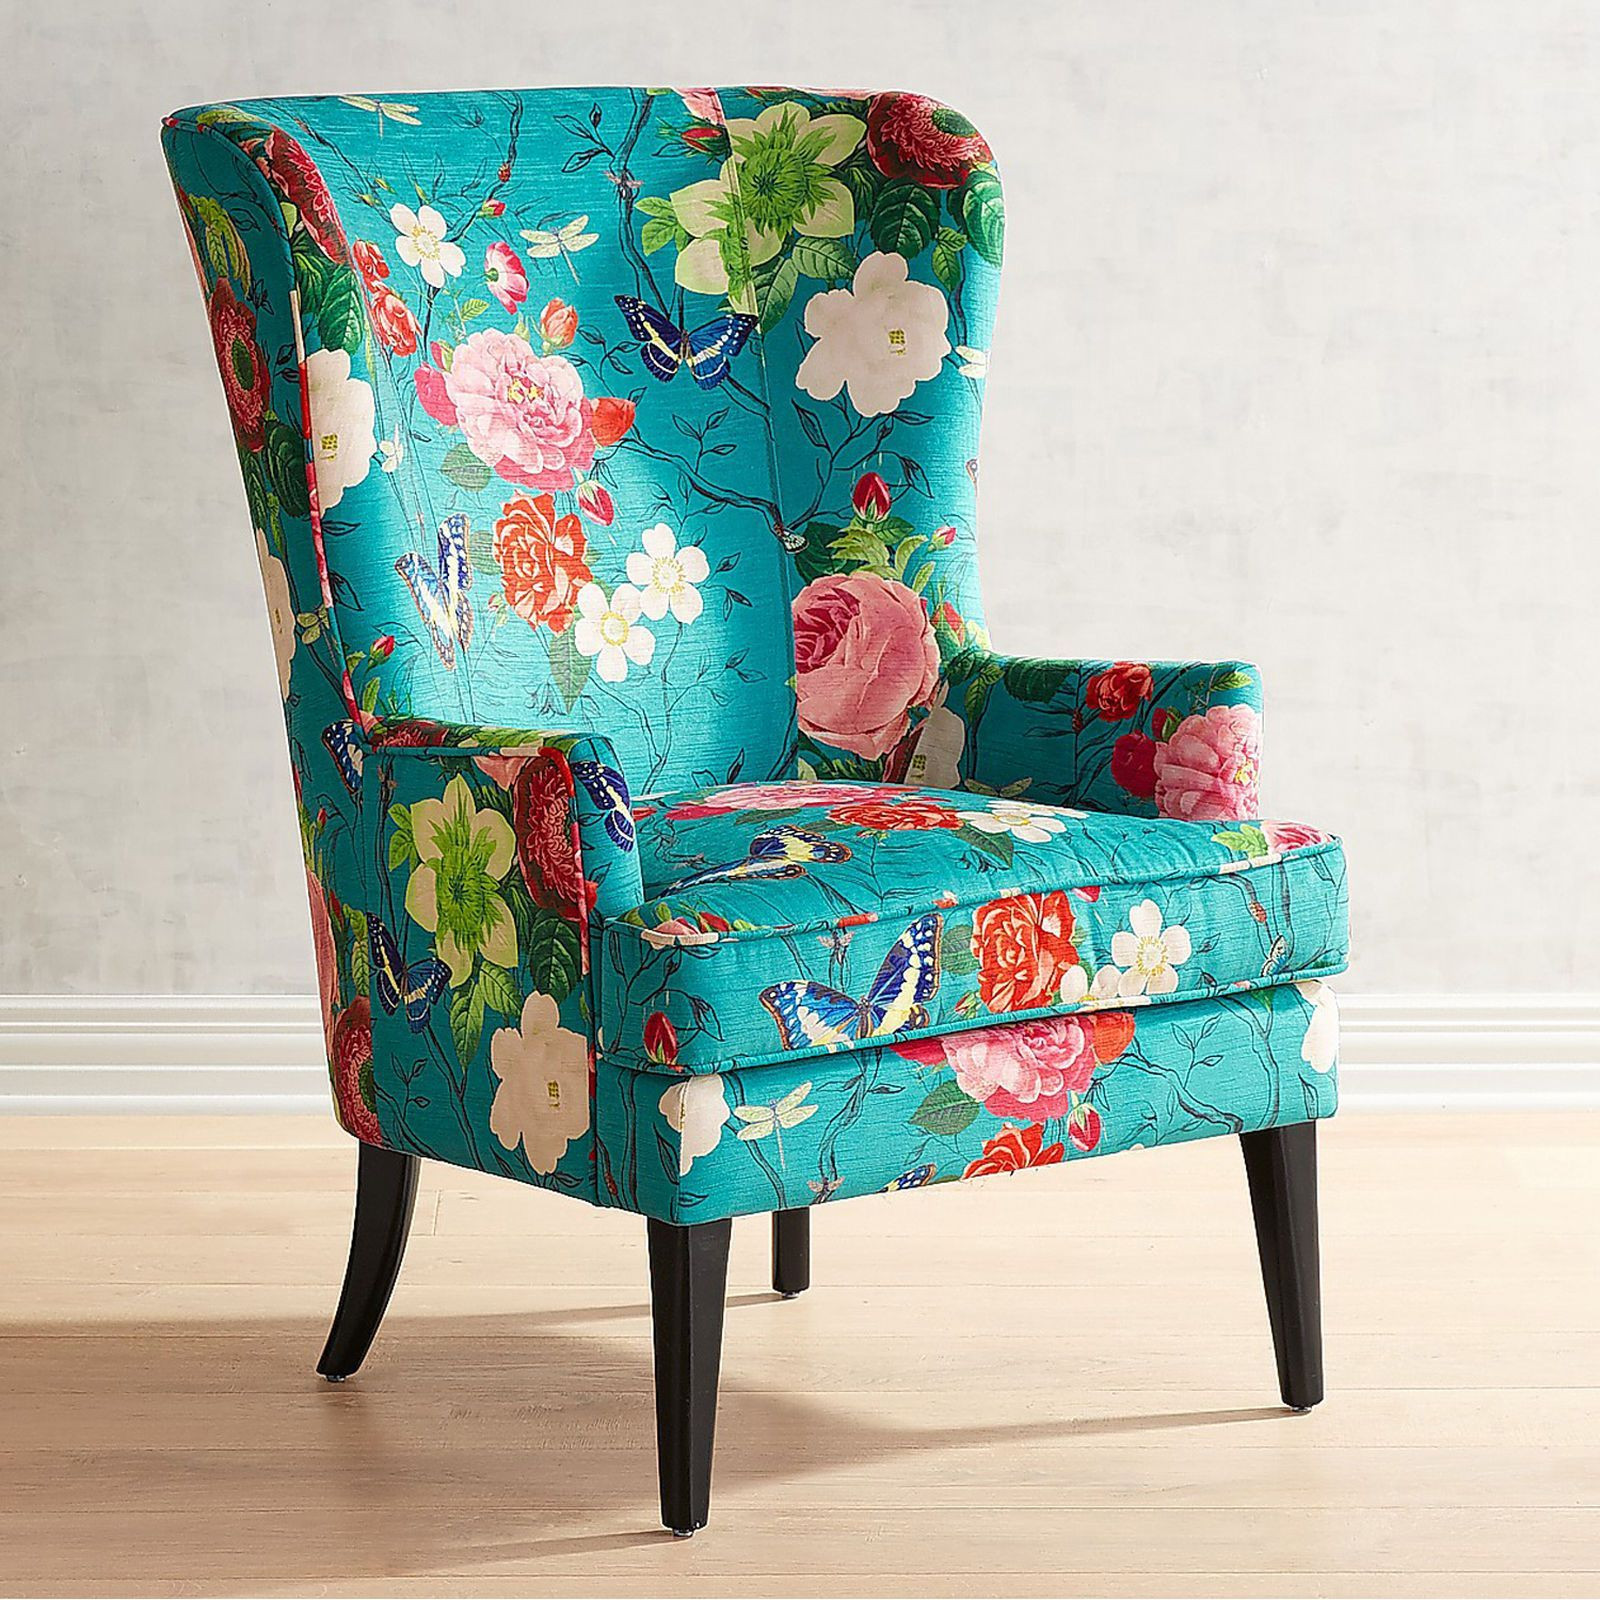 Floral Living Room Chairs
 Asher Flynn Floral Print Chair Home in 2019